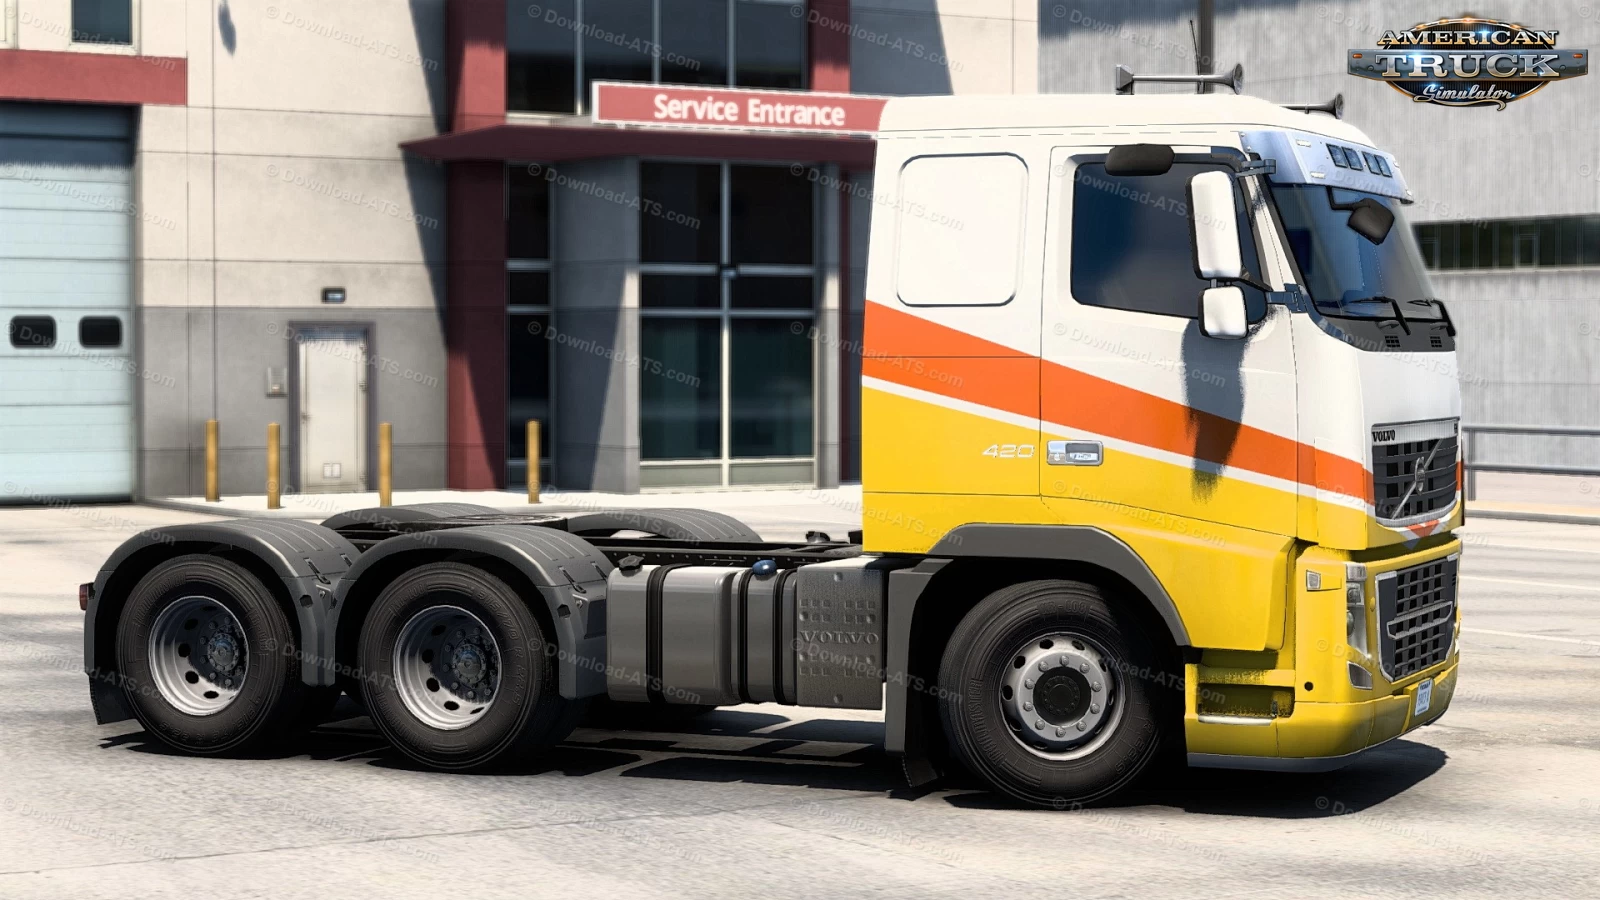 Volvo FH16 2009 / 2012 Truck v1.0 (1.41.x) for ATS